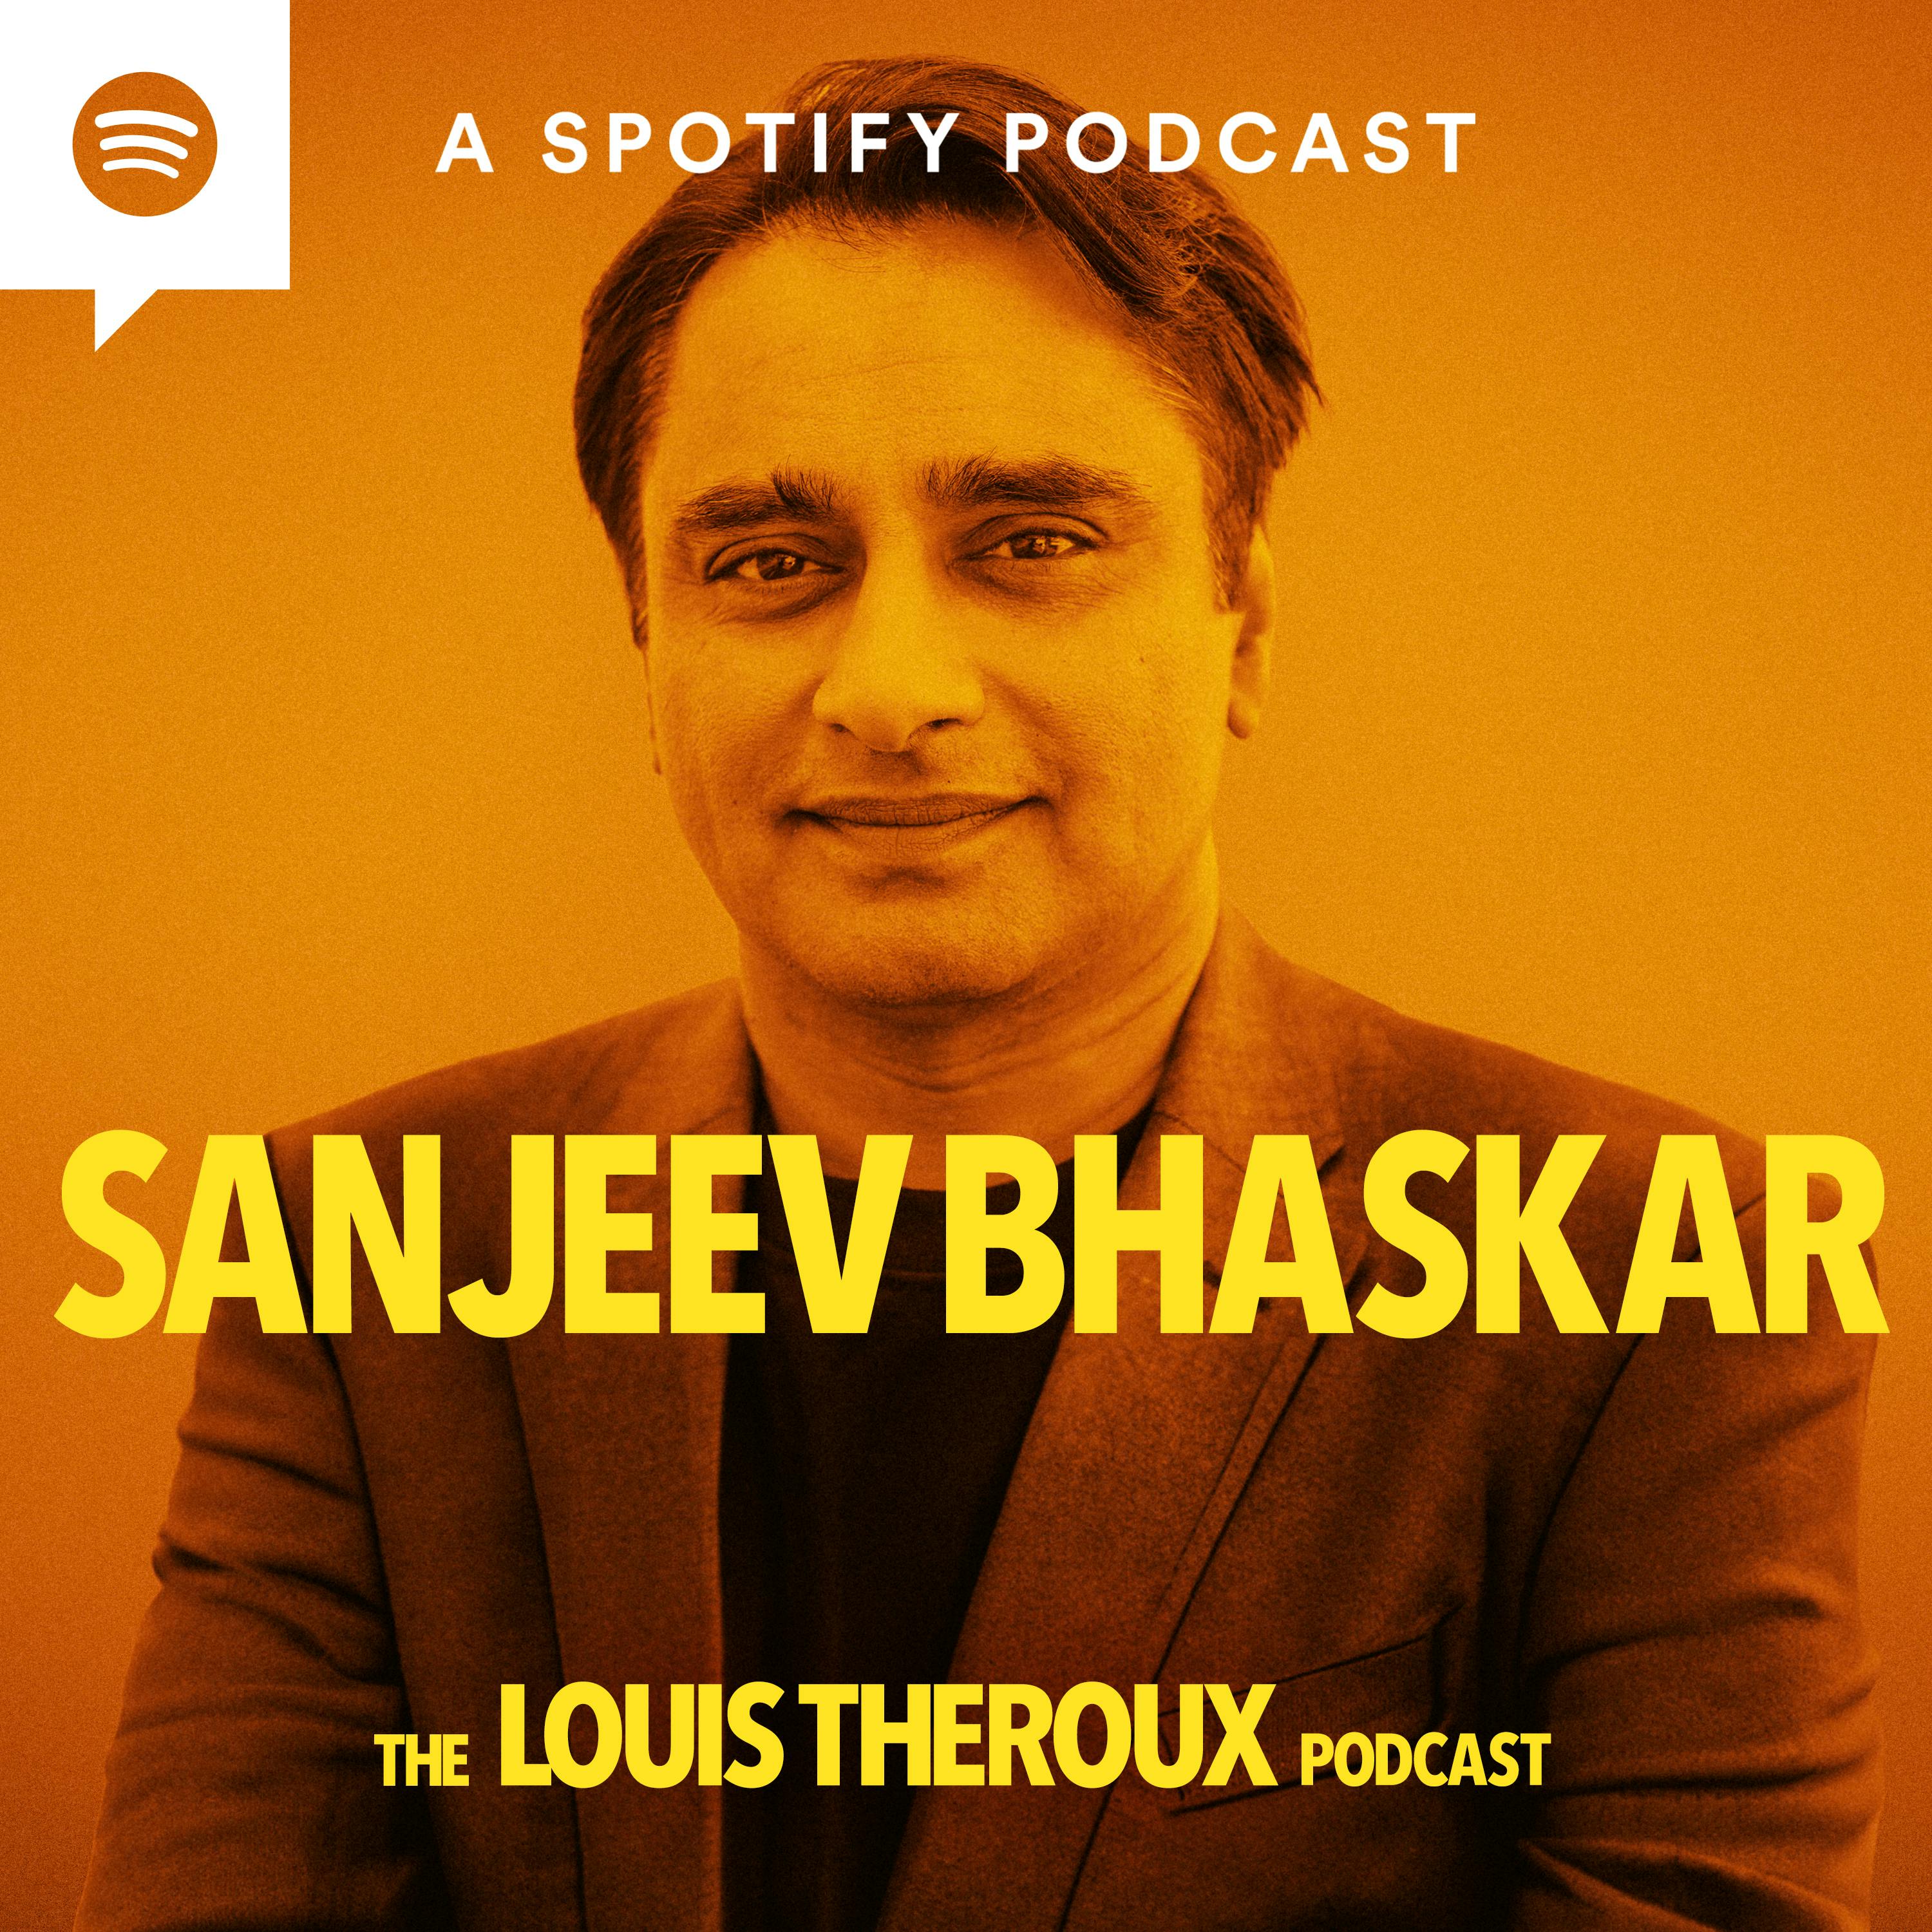 S2 EP6: Sanjeev Bhaskar on his ground-breaking comedy show The Kumars at No. 42, 'browning up’ in 1970s comedy, and his outrageous rider demands